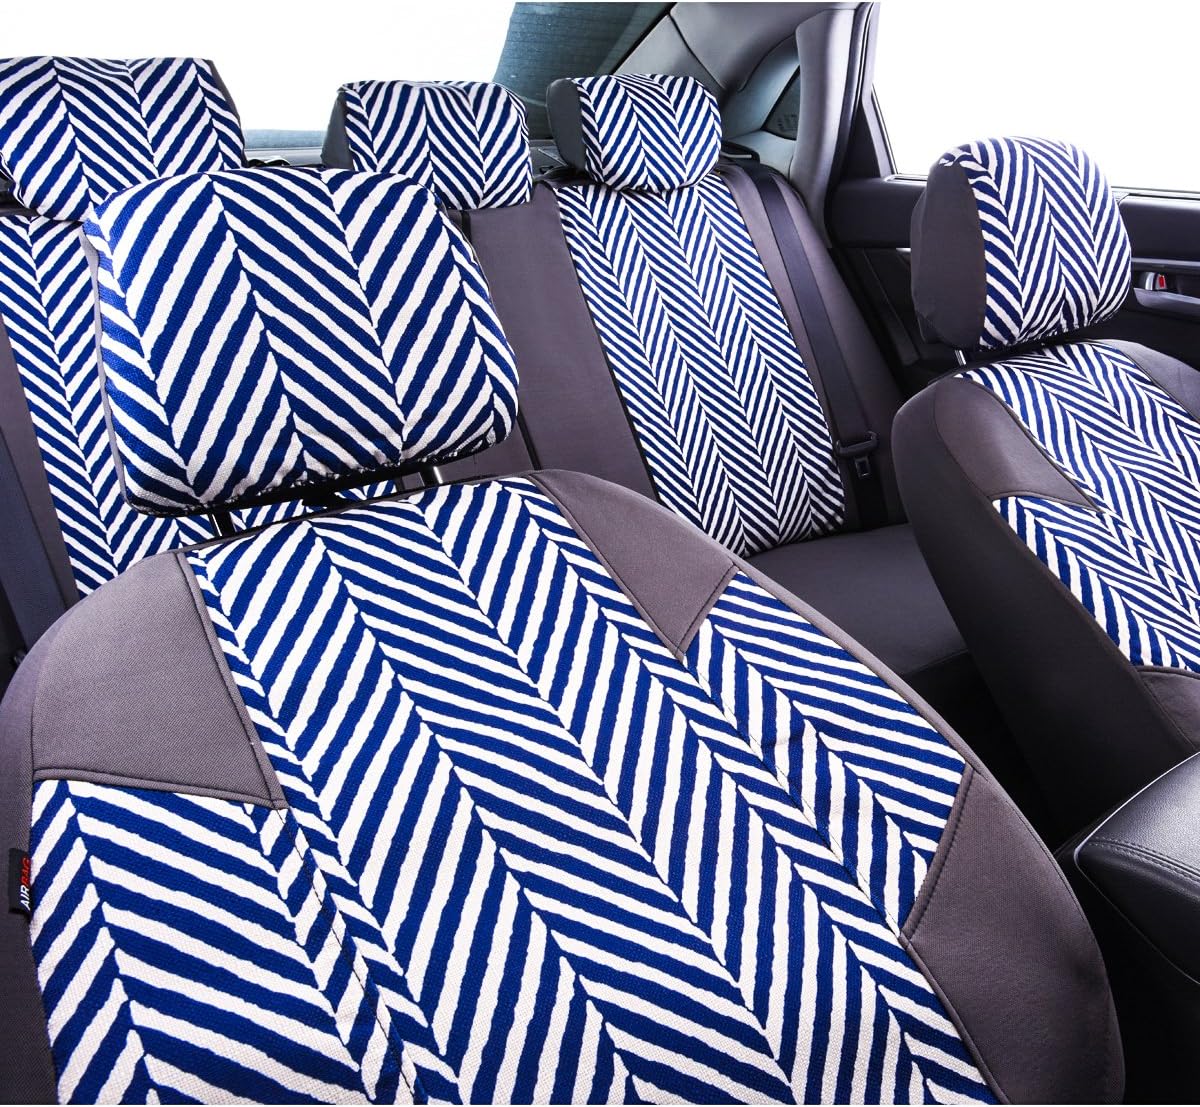 OUTLETS Sporty Full Set Universal Car Seat Cover,Airbag Compatible, Fit for Suvs,Vans,Sedans(Black with Blue)